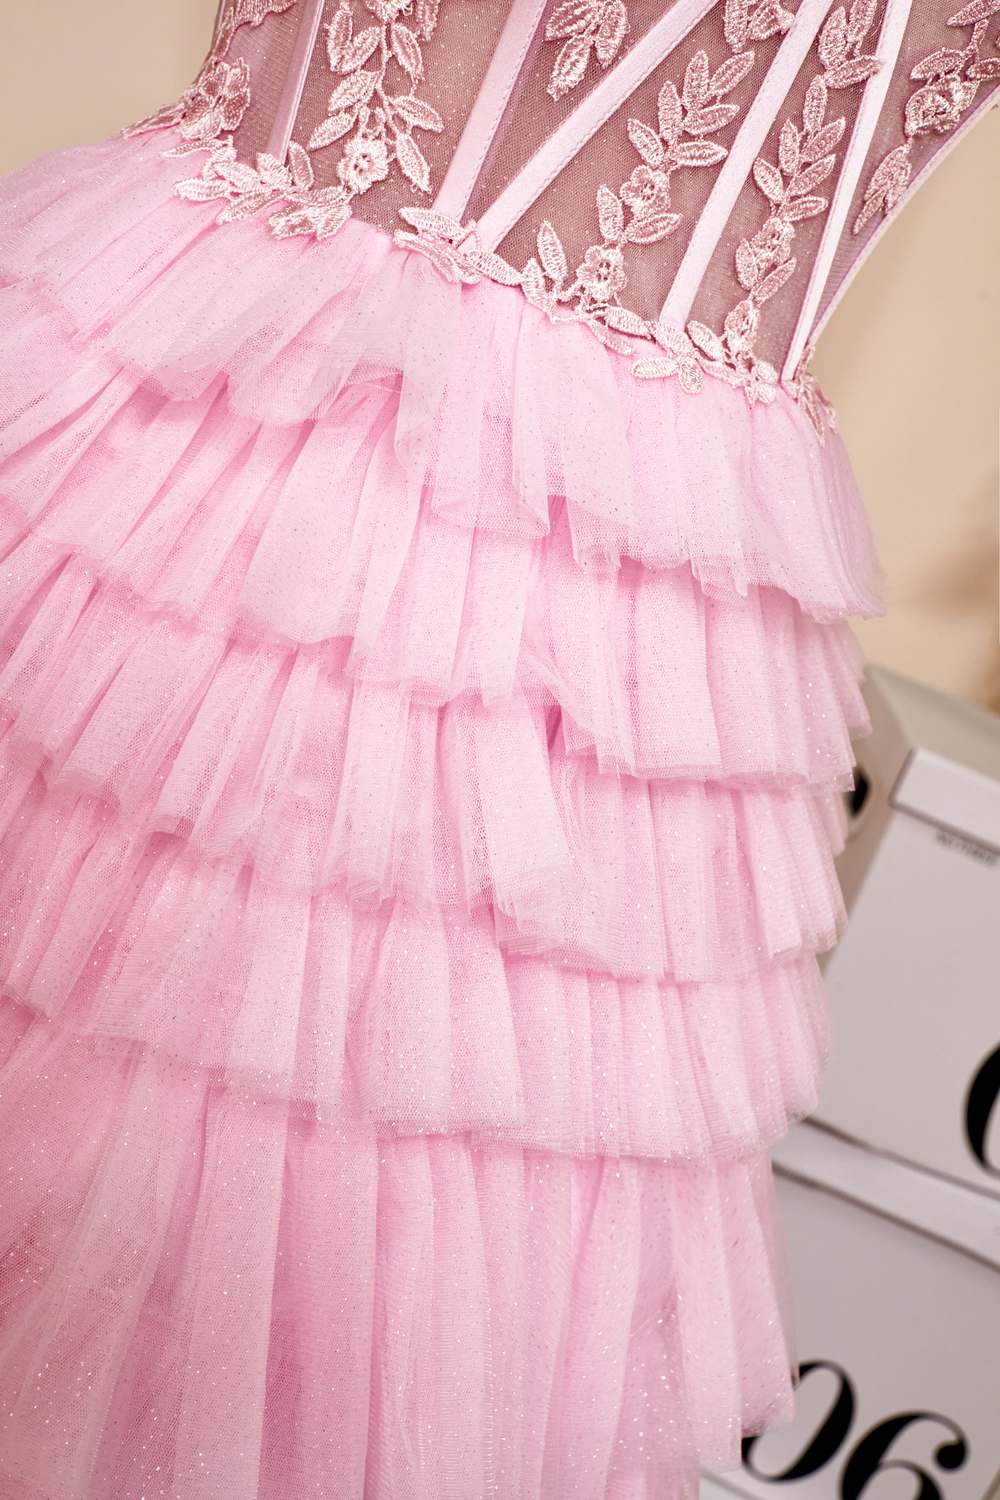 Pink A-line Strapless Appliques Multi-Layers Homecoming Dress